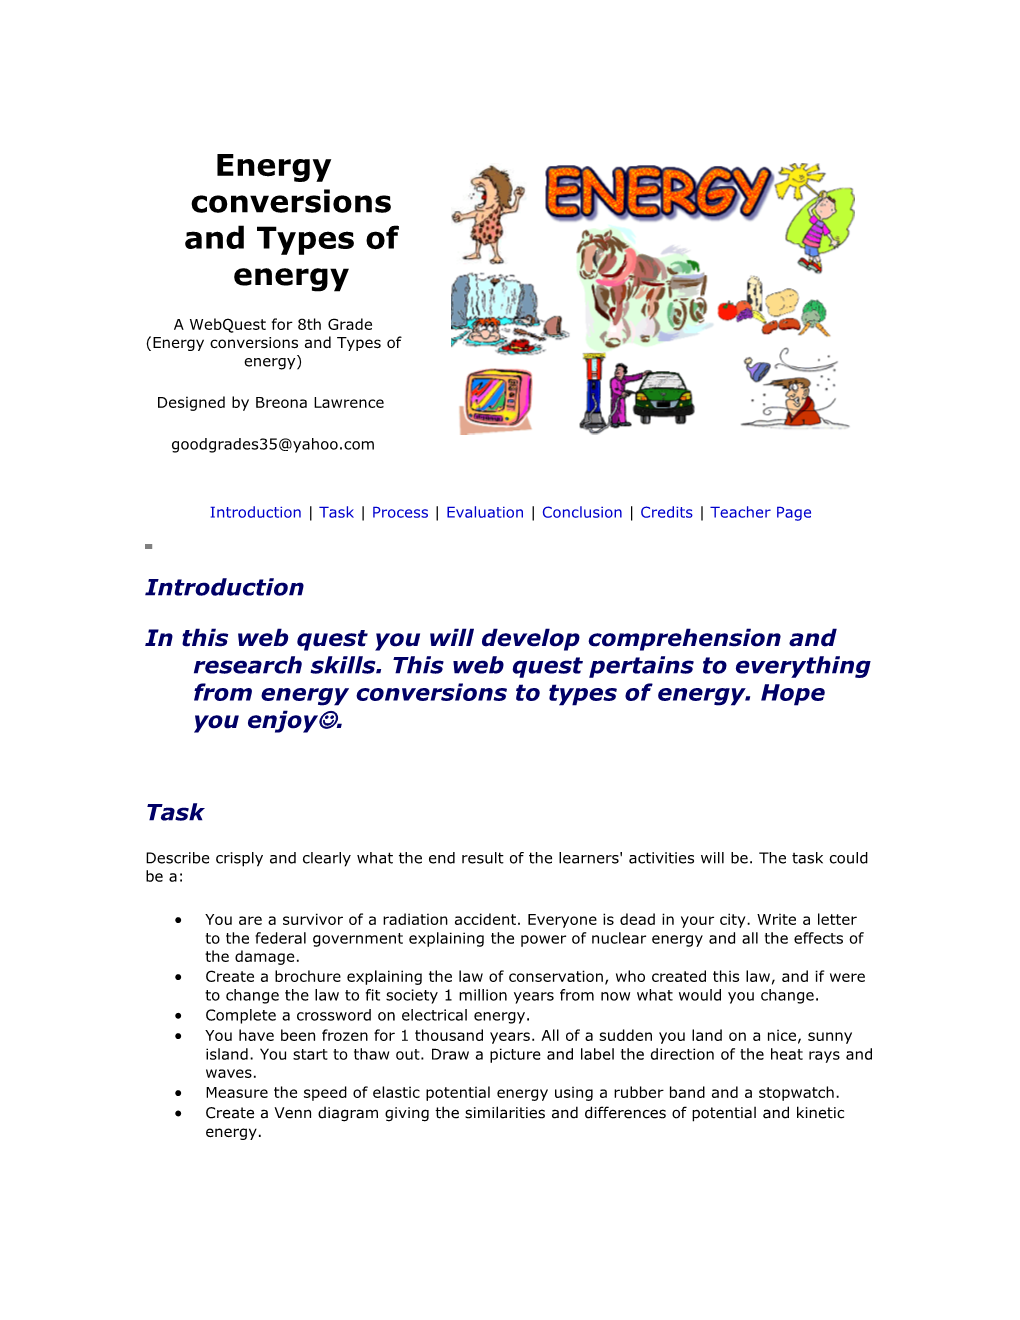 Energy Conversions and Types of Energy